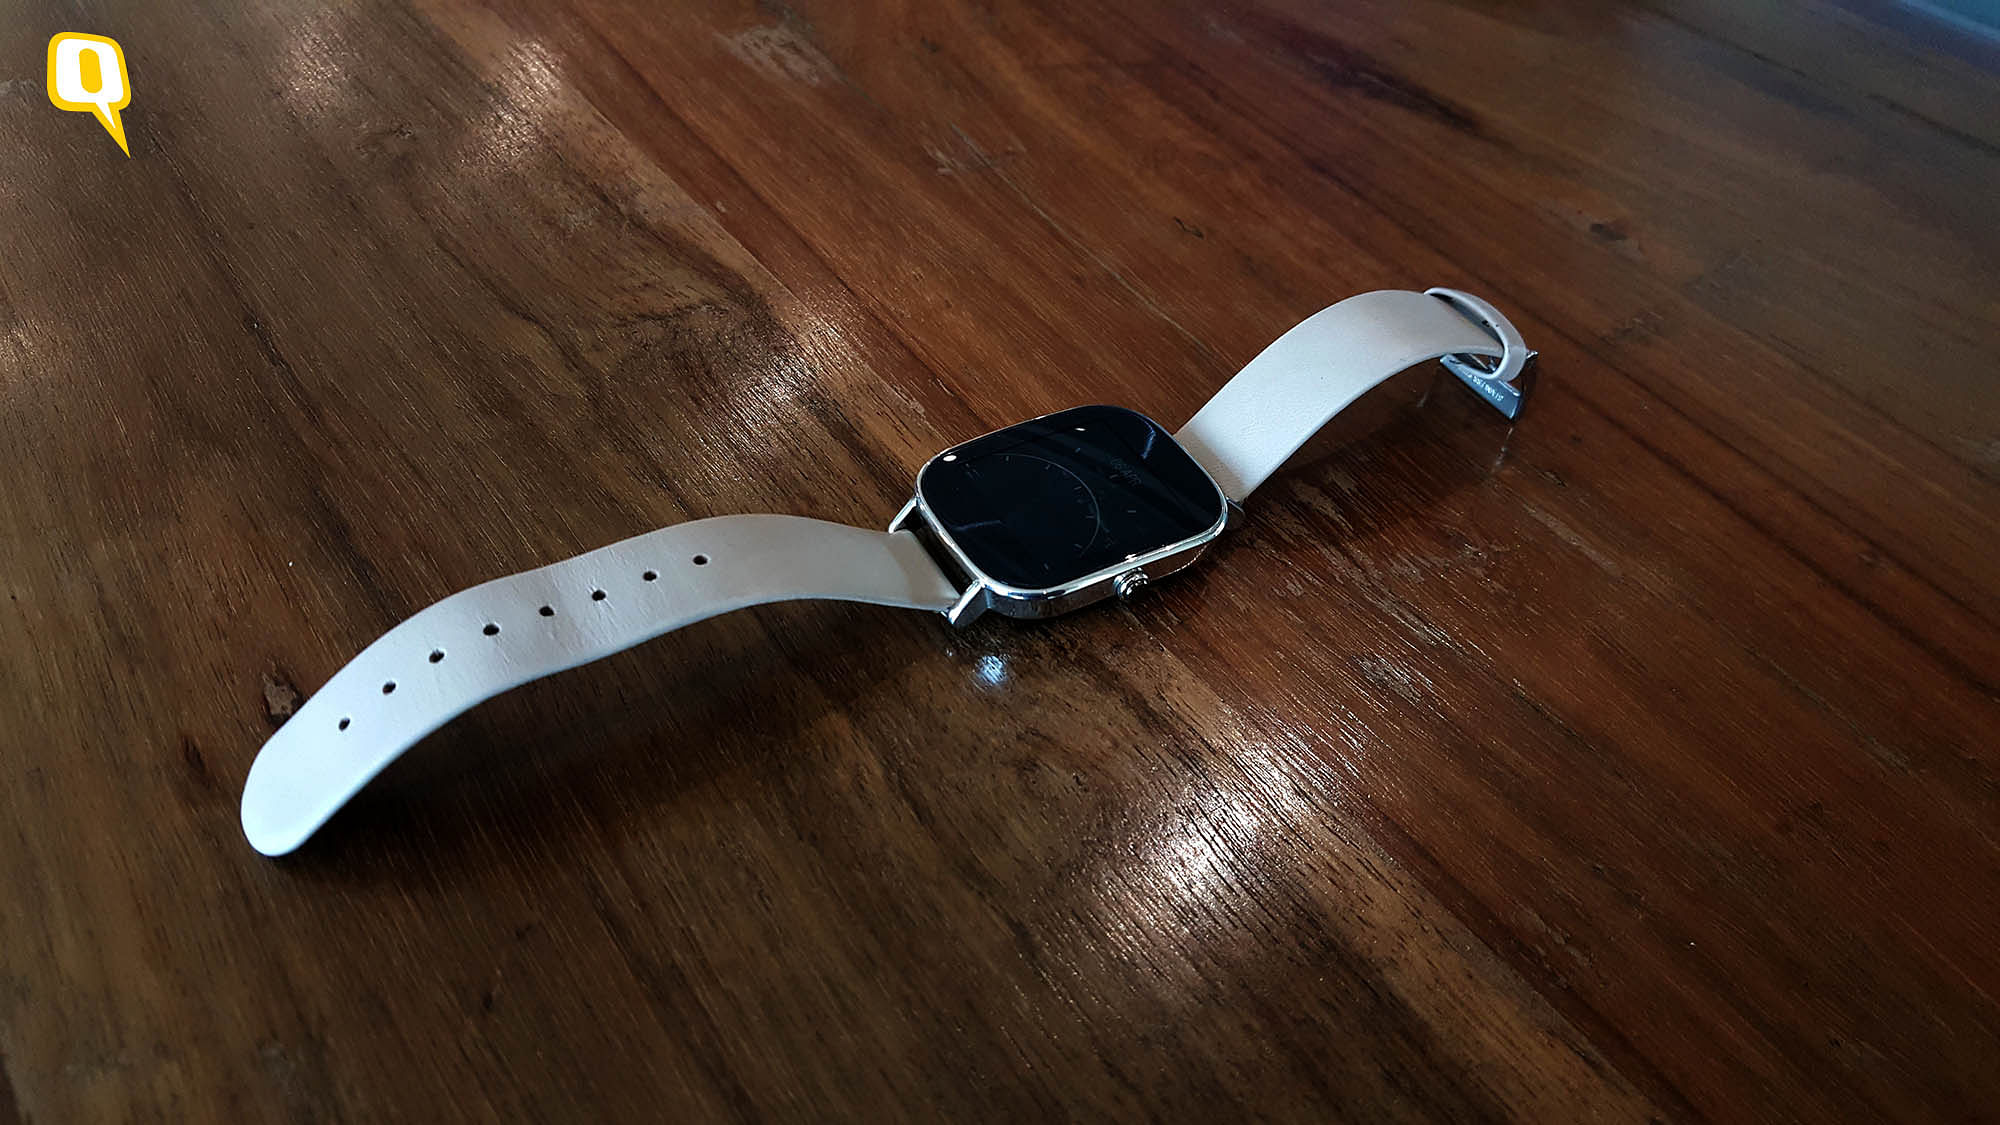 Asus ZenWatch 2. (Photo: <b>The Quint</b>)